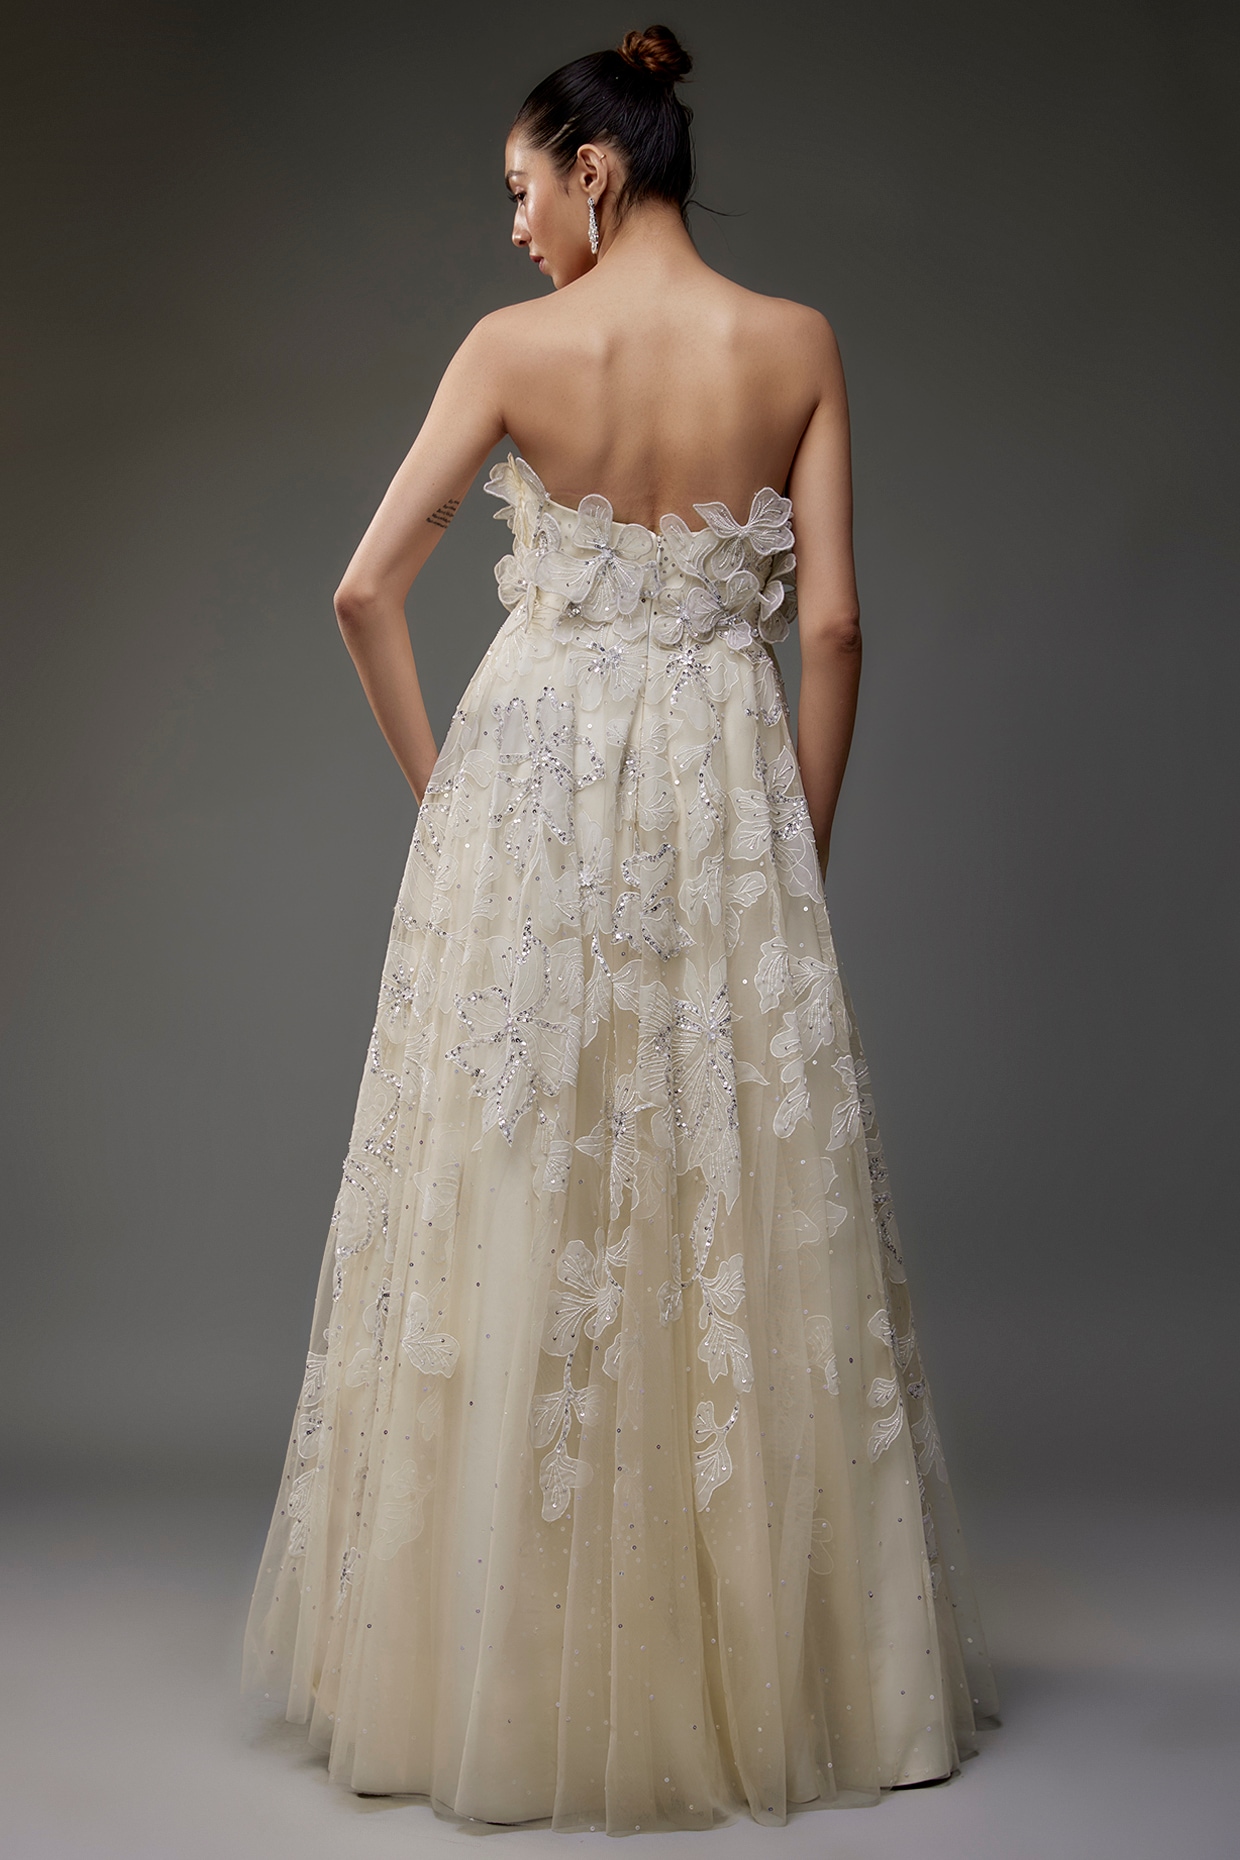 Strapless V-neck Illusion Neckline Fit And Flare Wedding Dresses With Floral  Applique | Kleinfeld Bridal